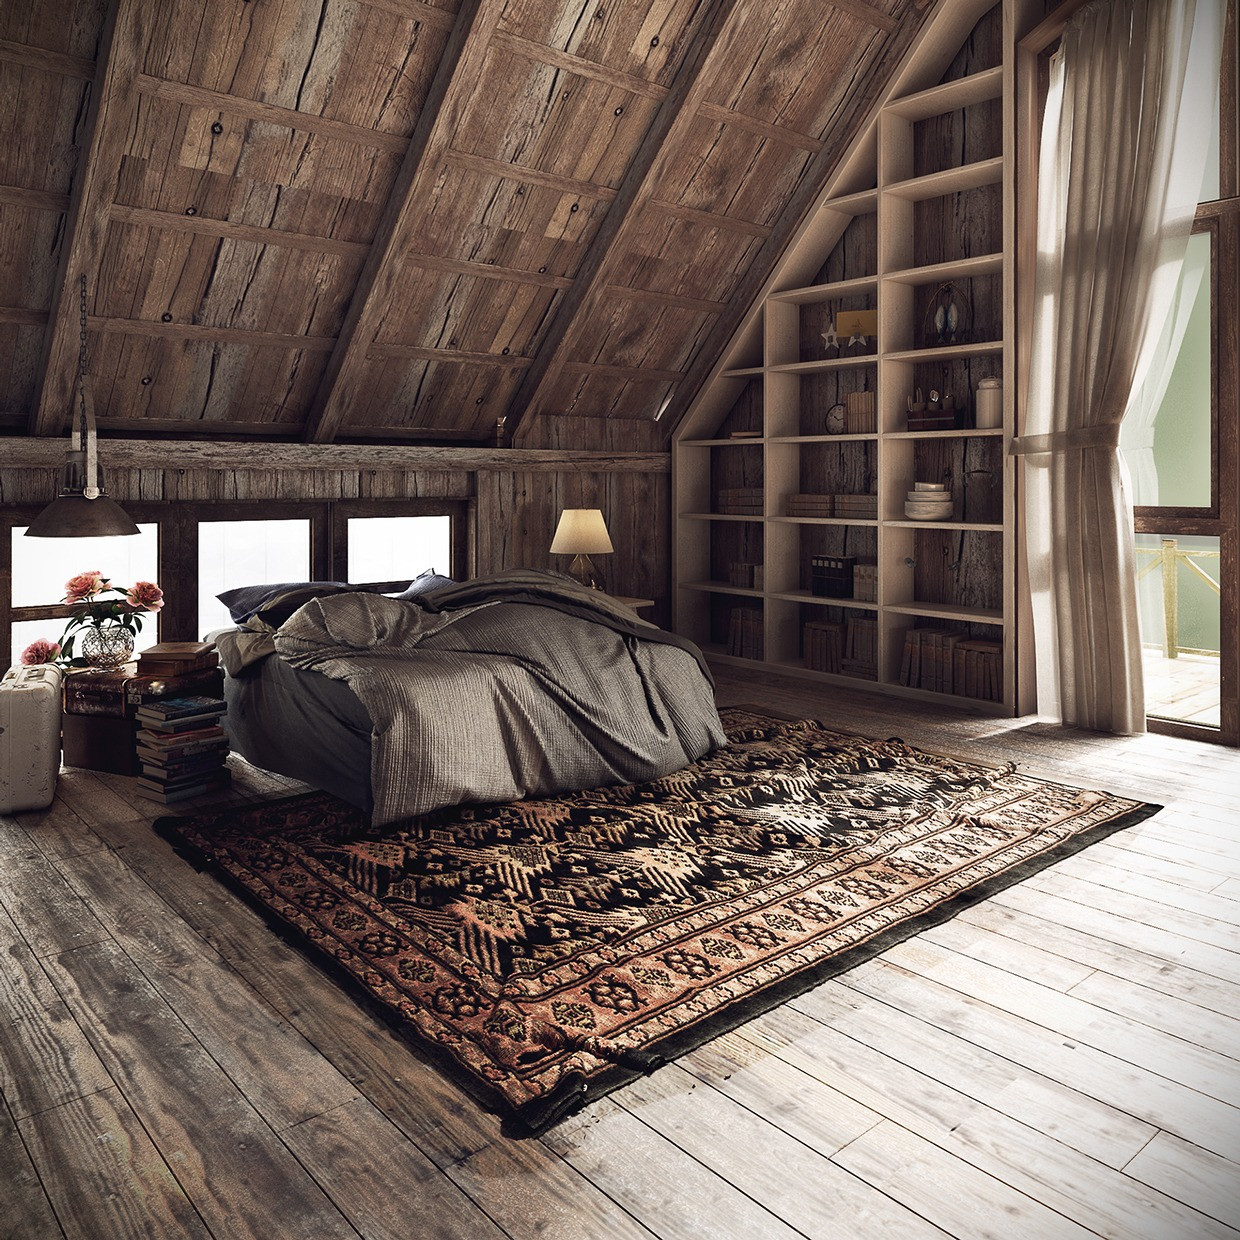 Rustic Industrial Bedroom
 Three Homes with a Contemporary Twist on Rustic Design